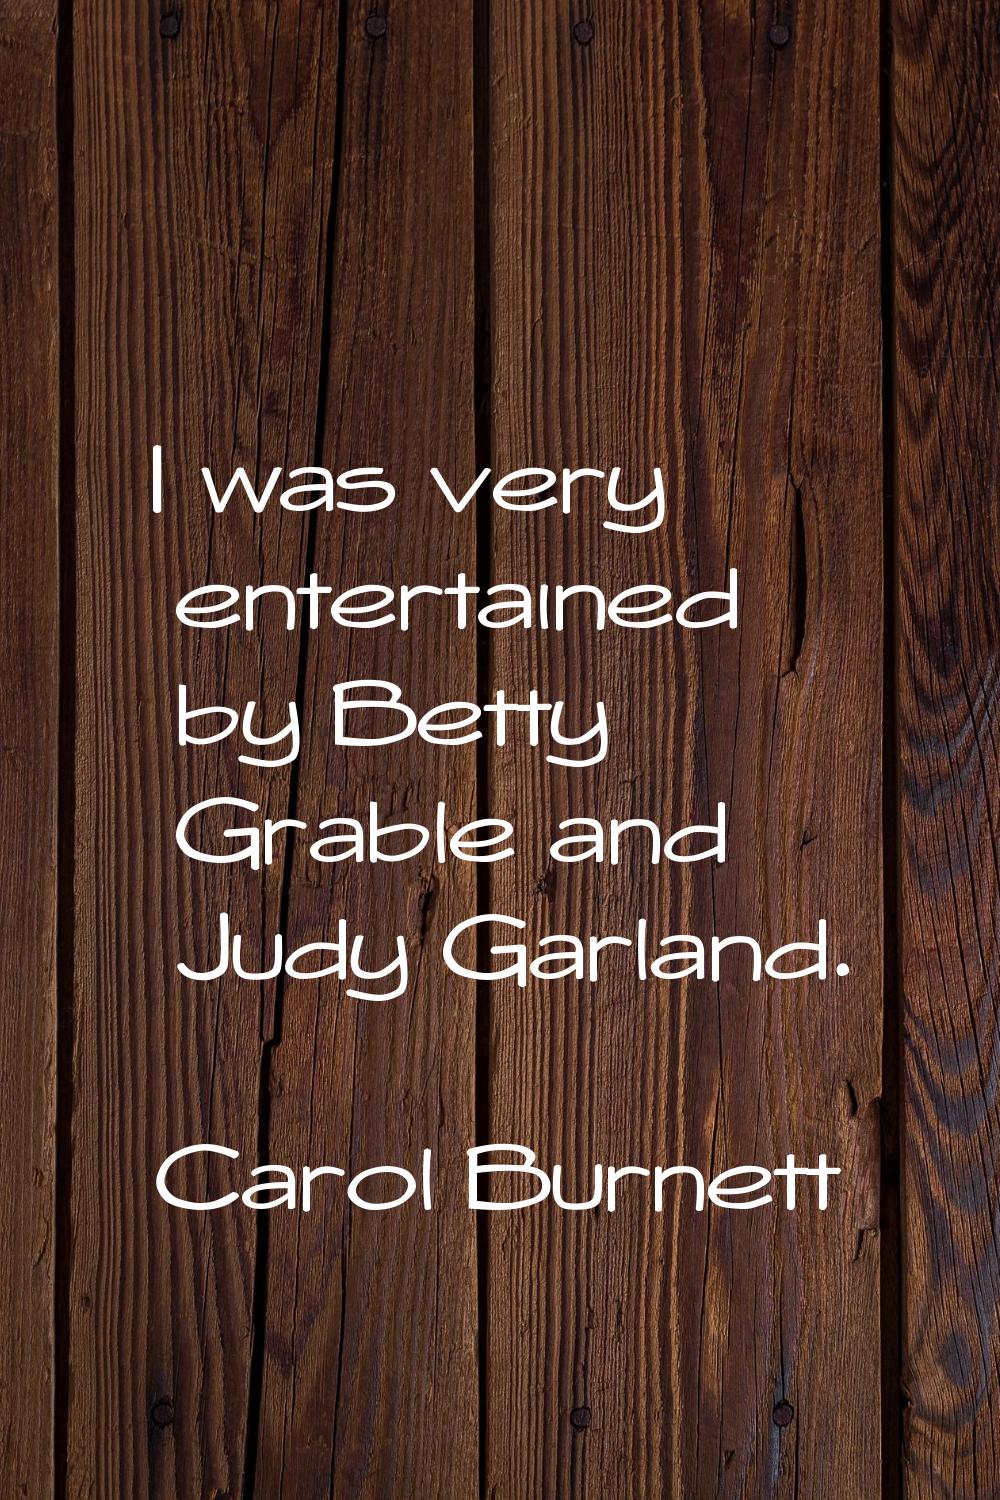 I was very entertained by Betty Grable and Judy Garland.